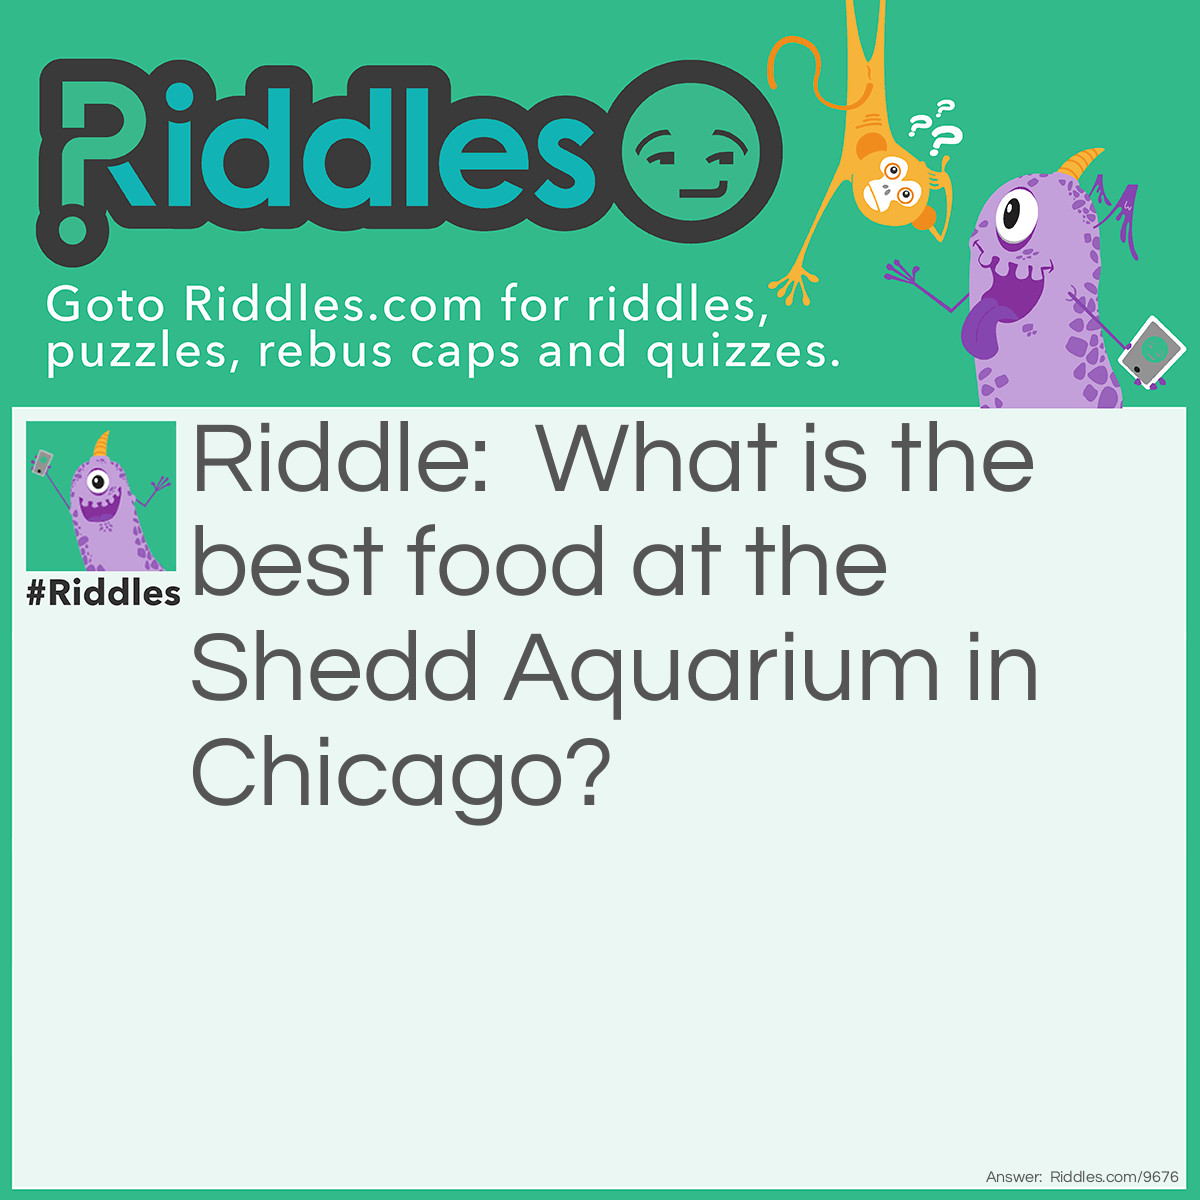 Riddle: What is the best food at the Shedd Aquarium in Chicago? Answer: Deep fish pizza!